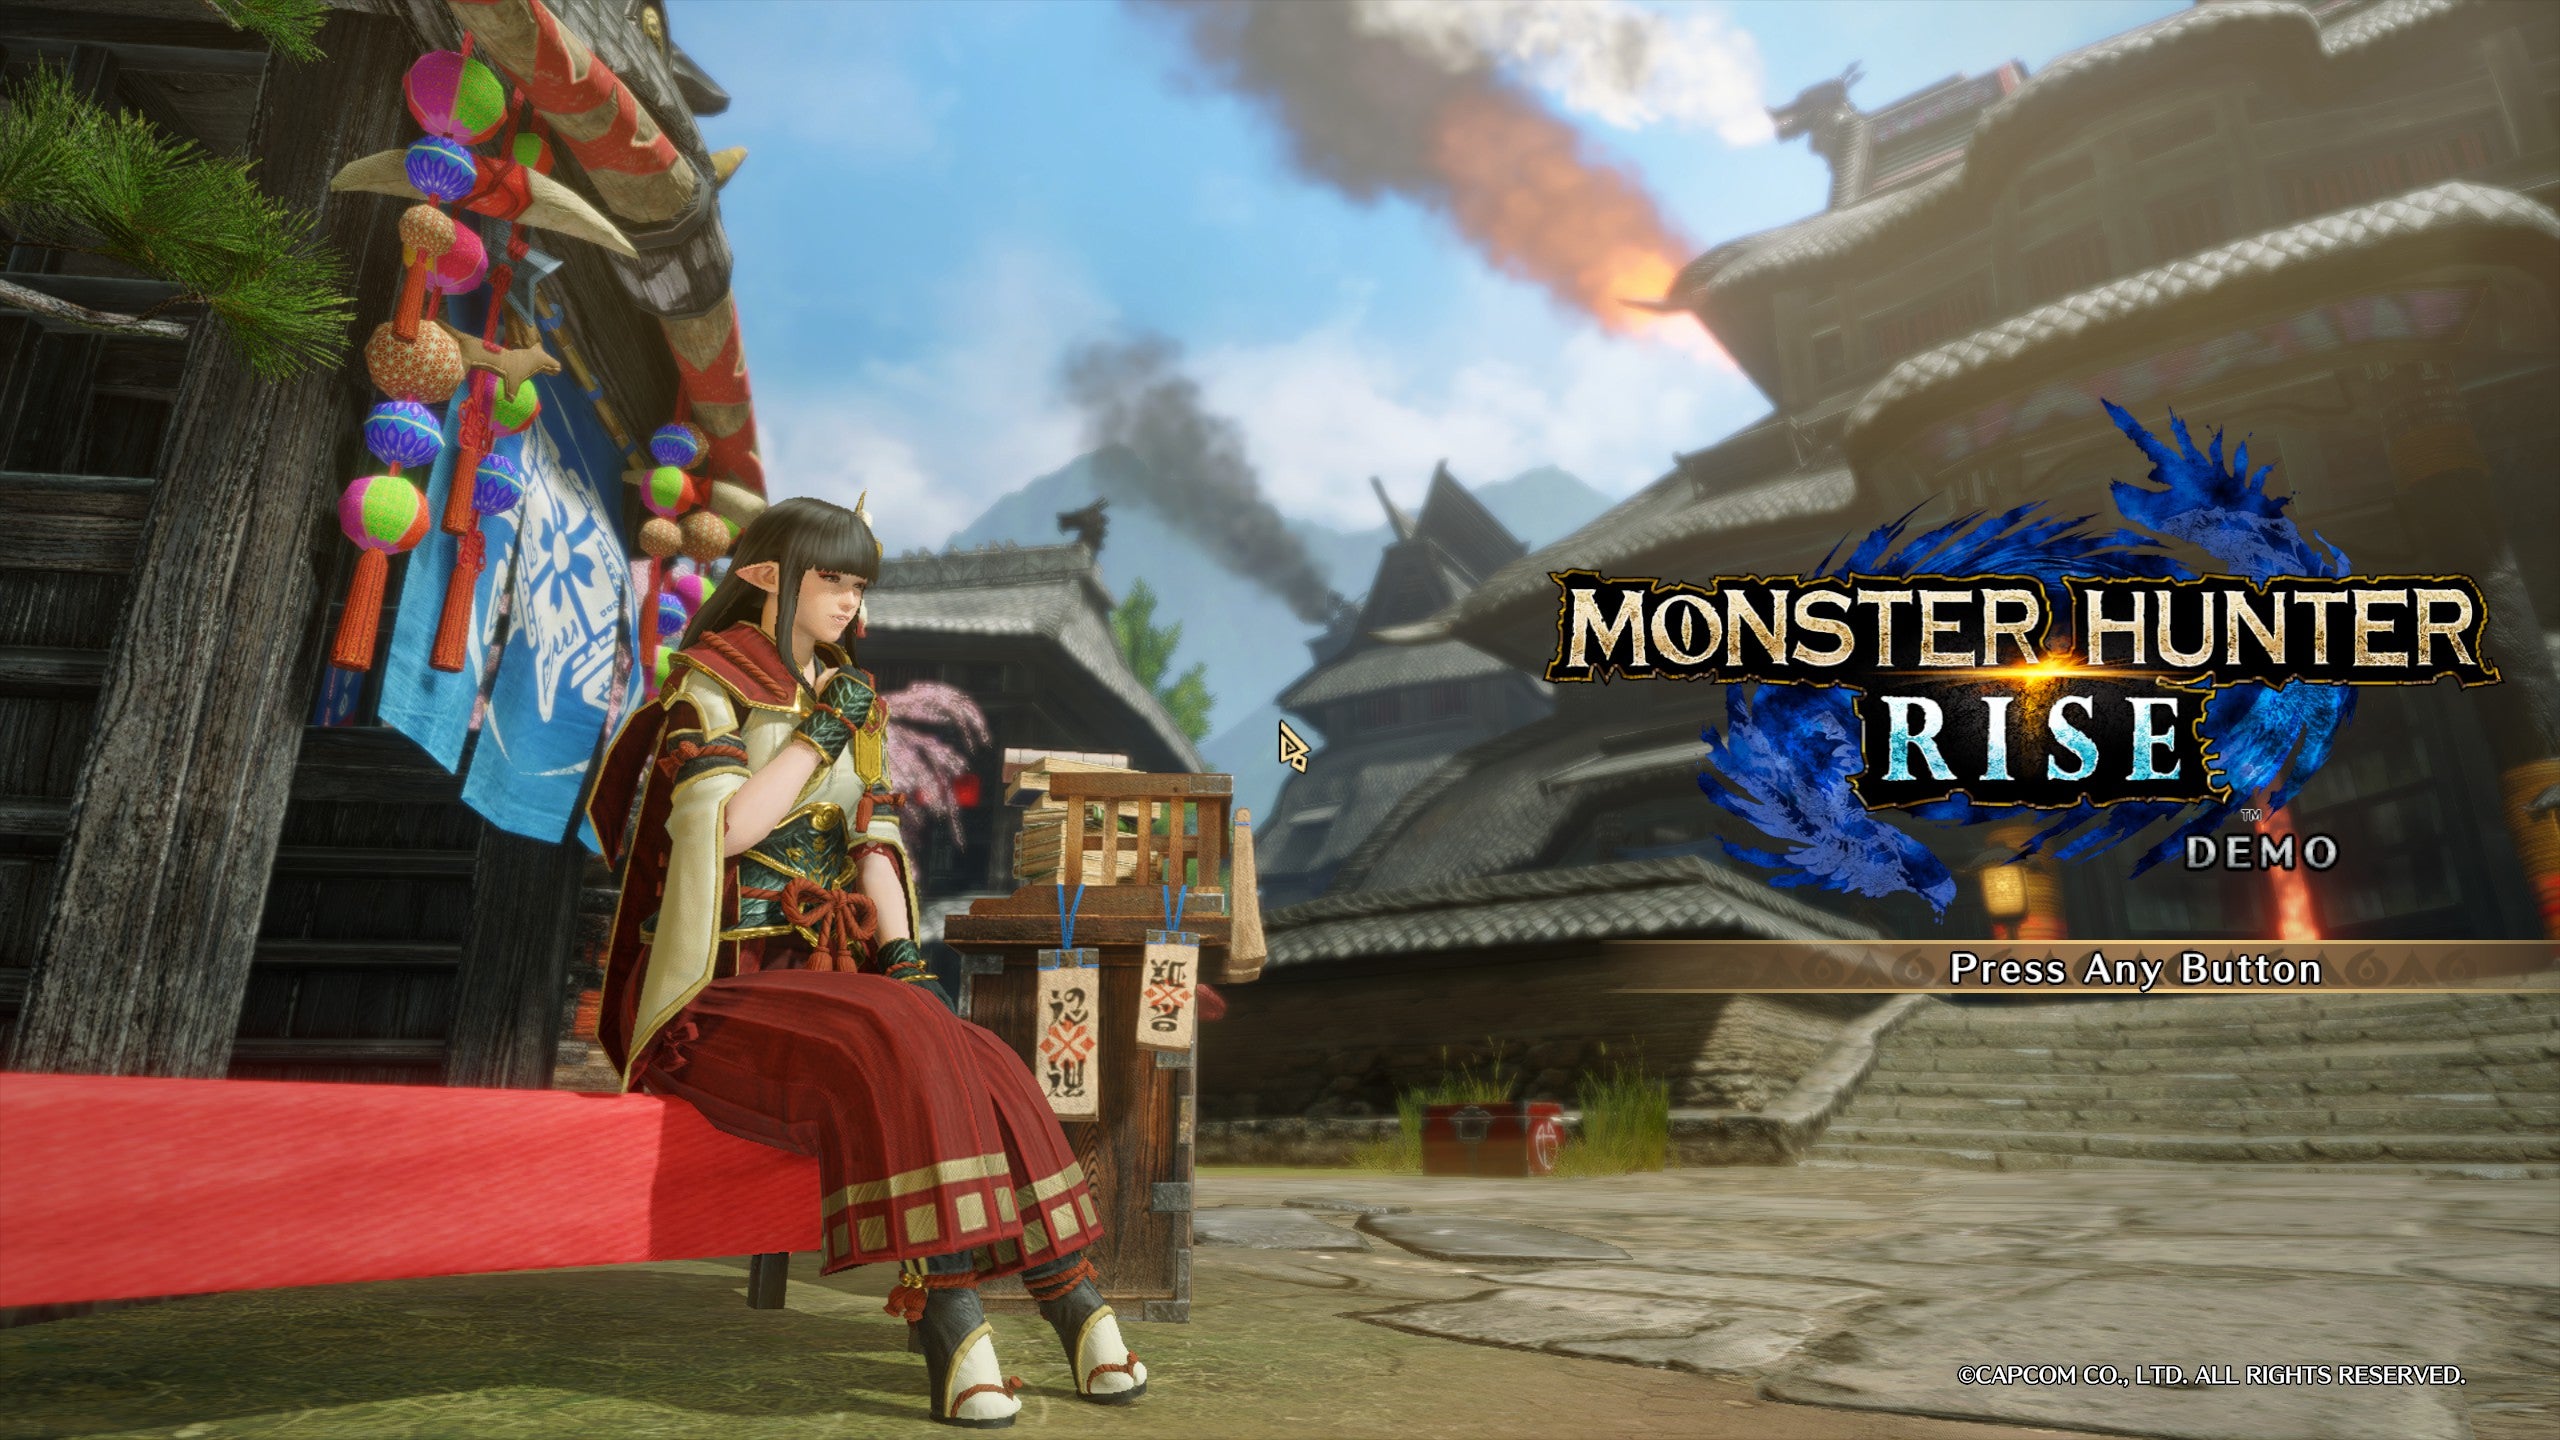 A sitting woman sings on the start screen for Monster Hunter Rise.